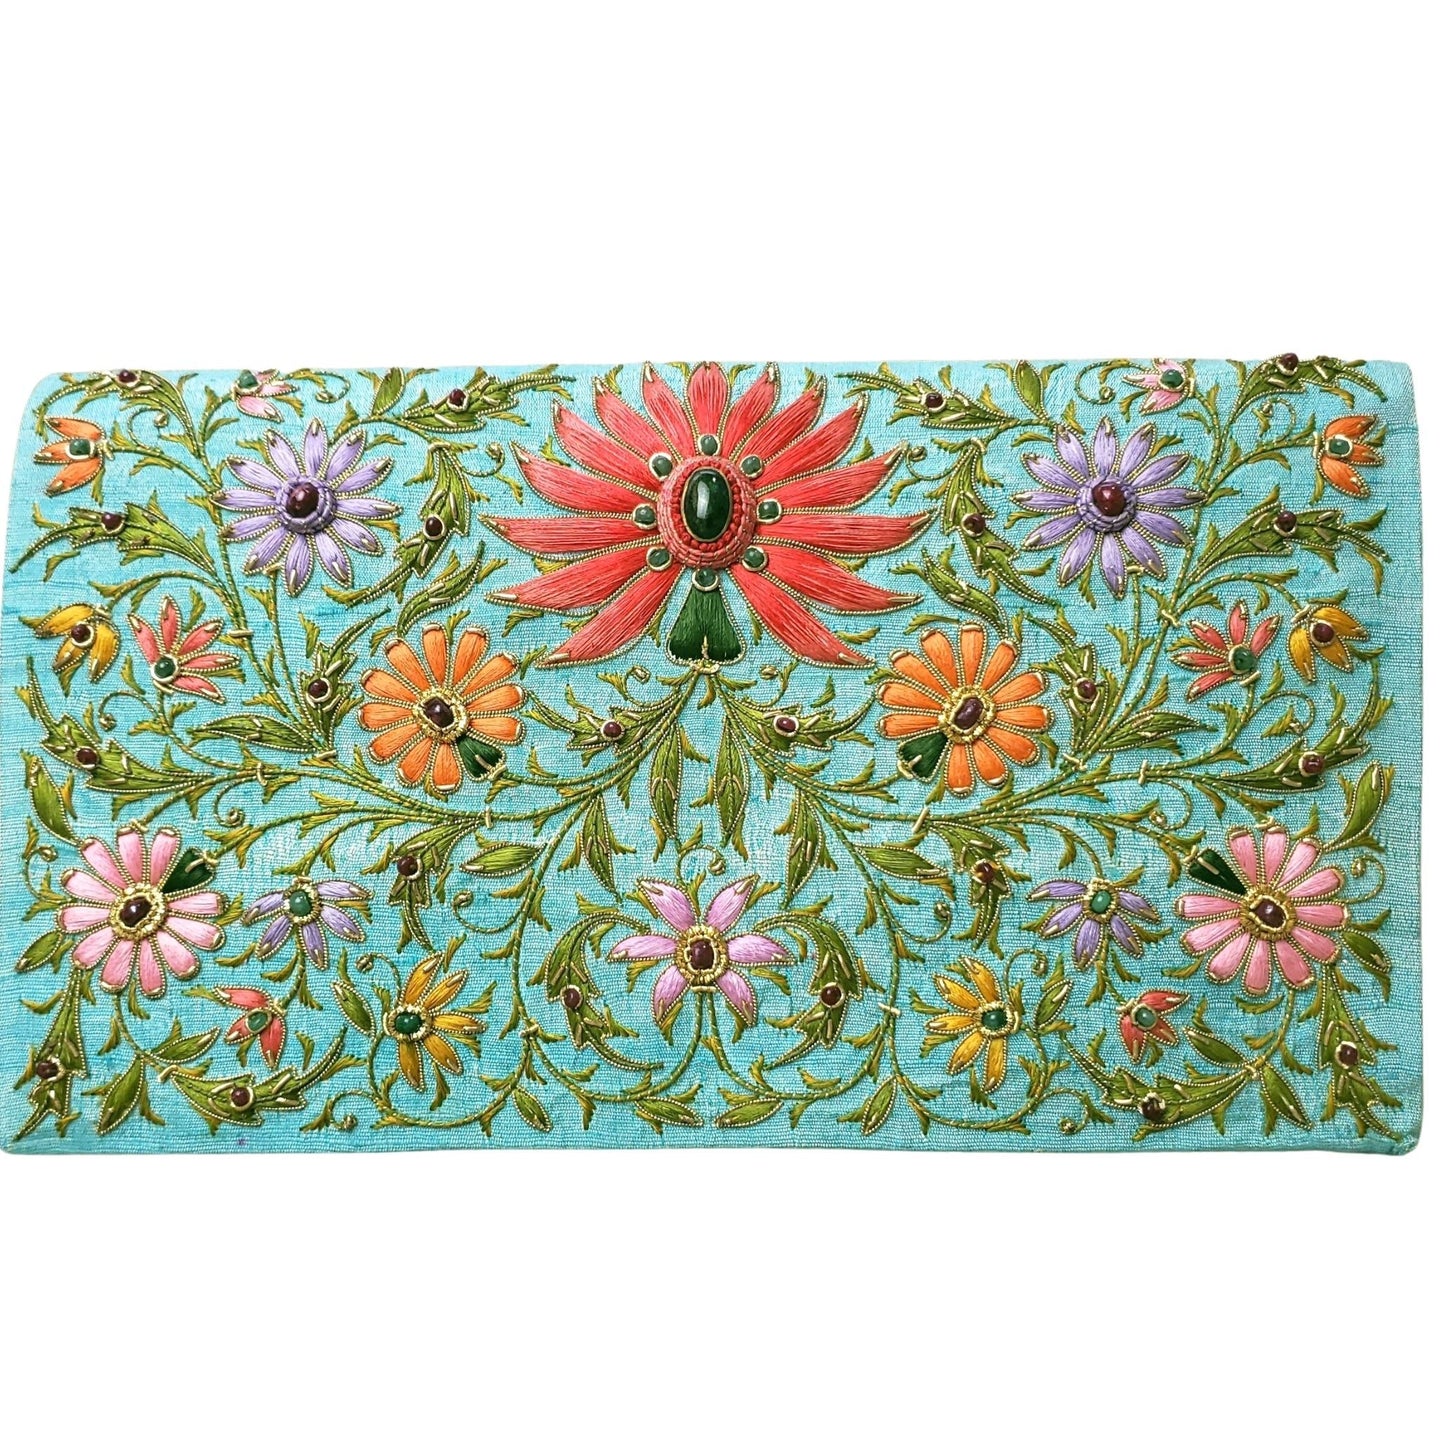 Turquoise silk handbag embroidered with coral colored lotus flower BoutiqueByMariam.